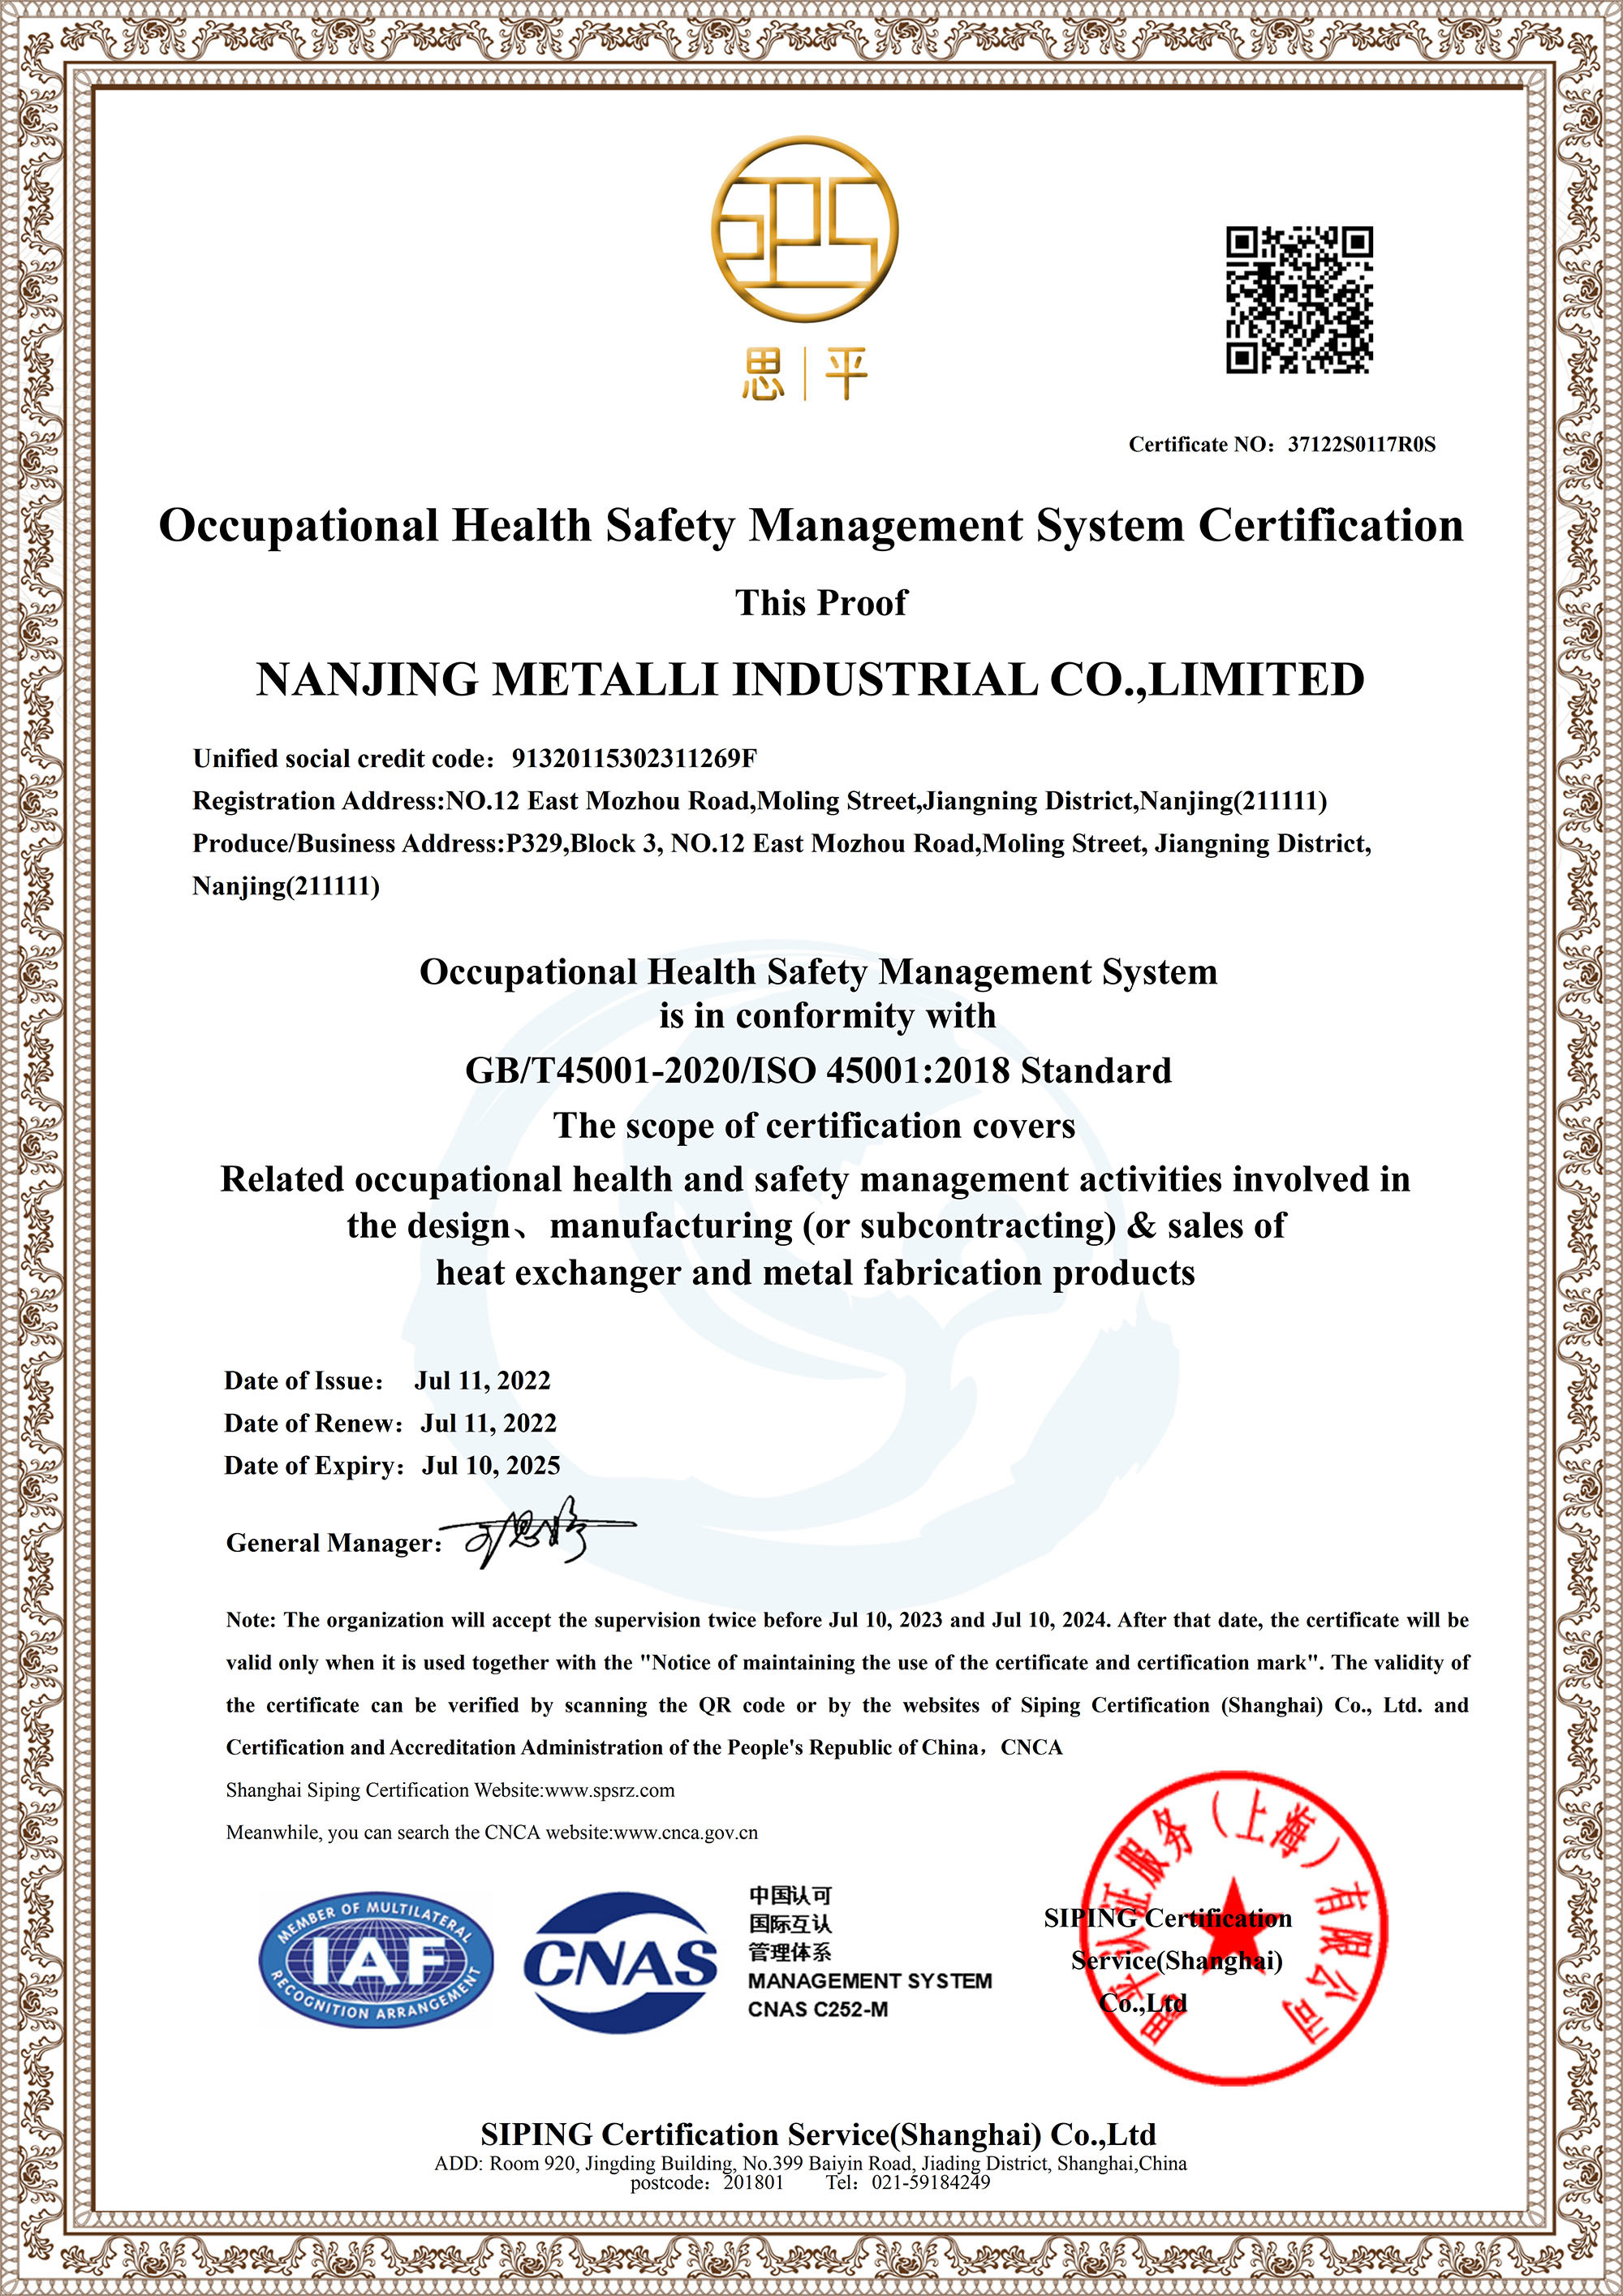 Occupational Health Safety Management System Certification